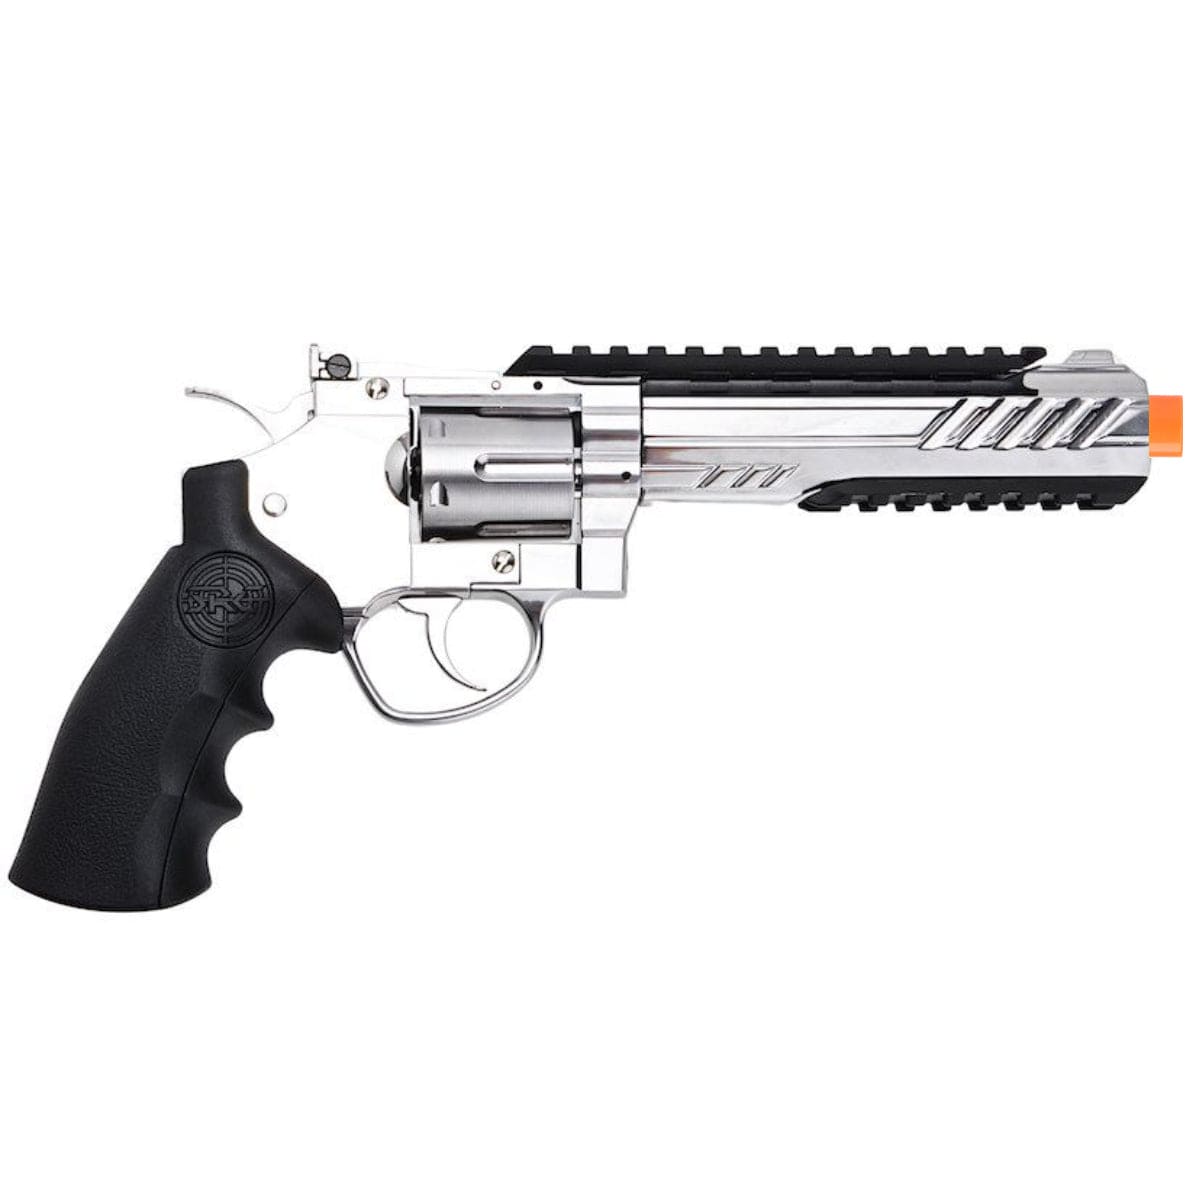 Airsportinggoods SRC SRC 6 INCH TITAN FULL METAL CO2 AIRSOFT REVOLVER SILVER